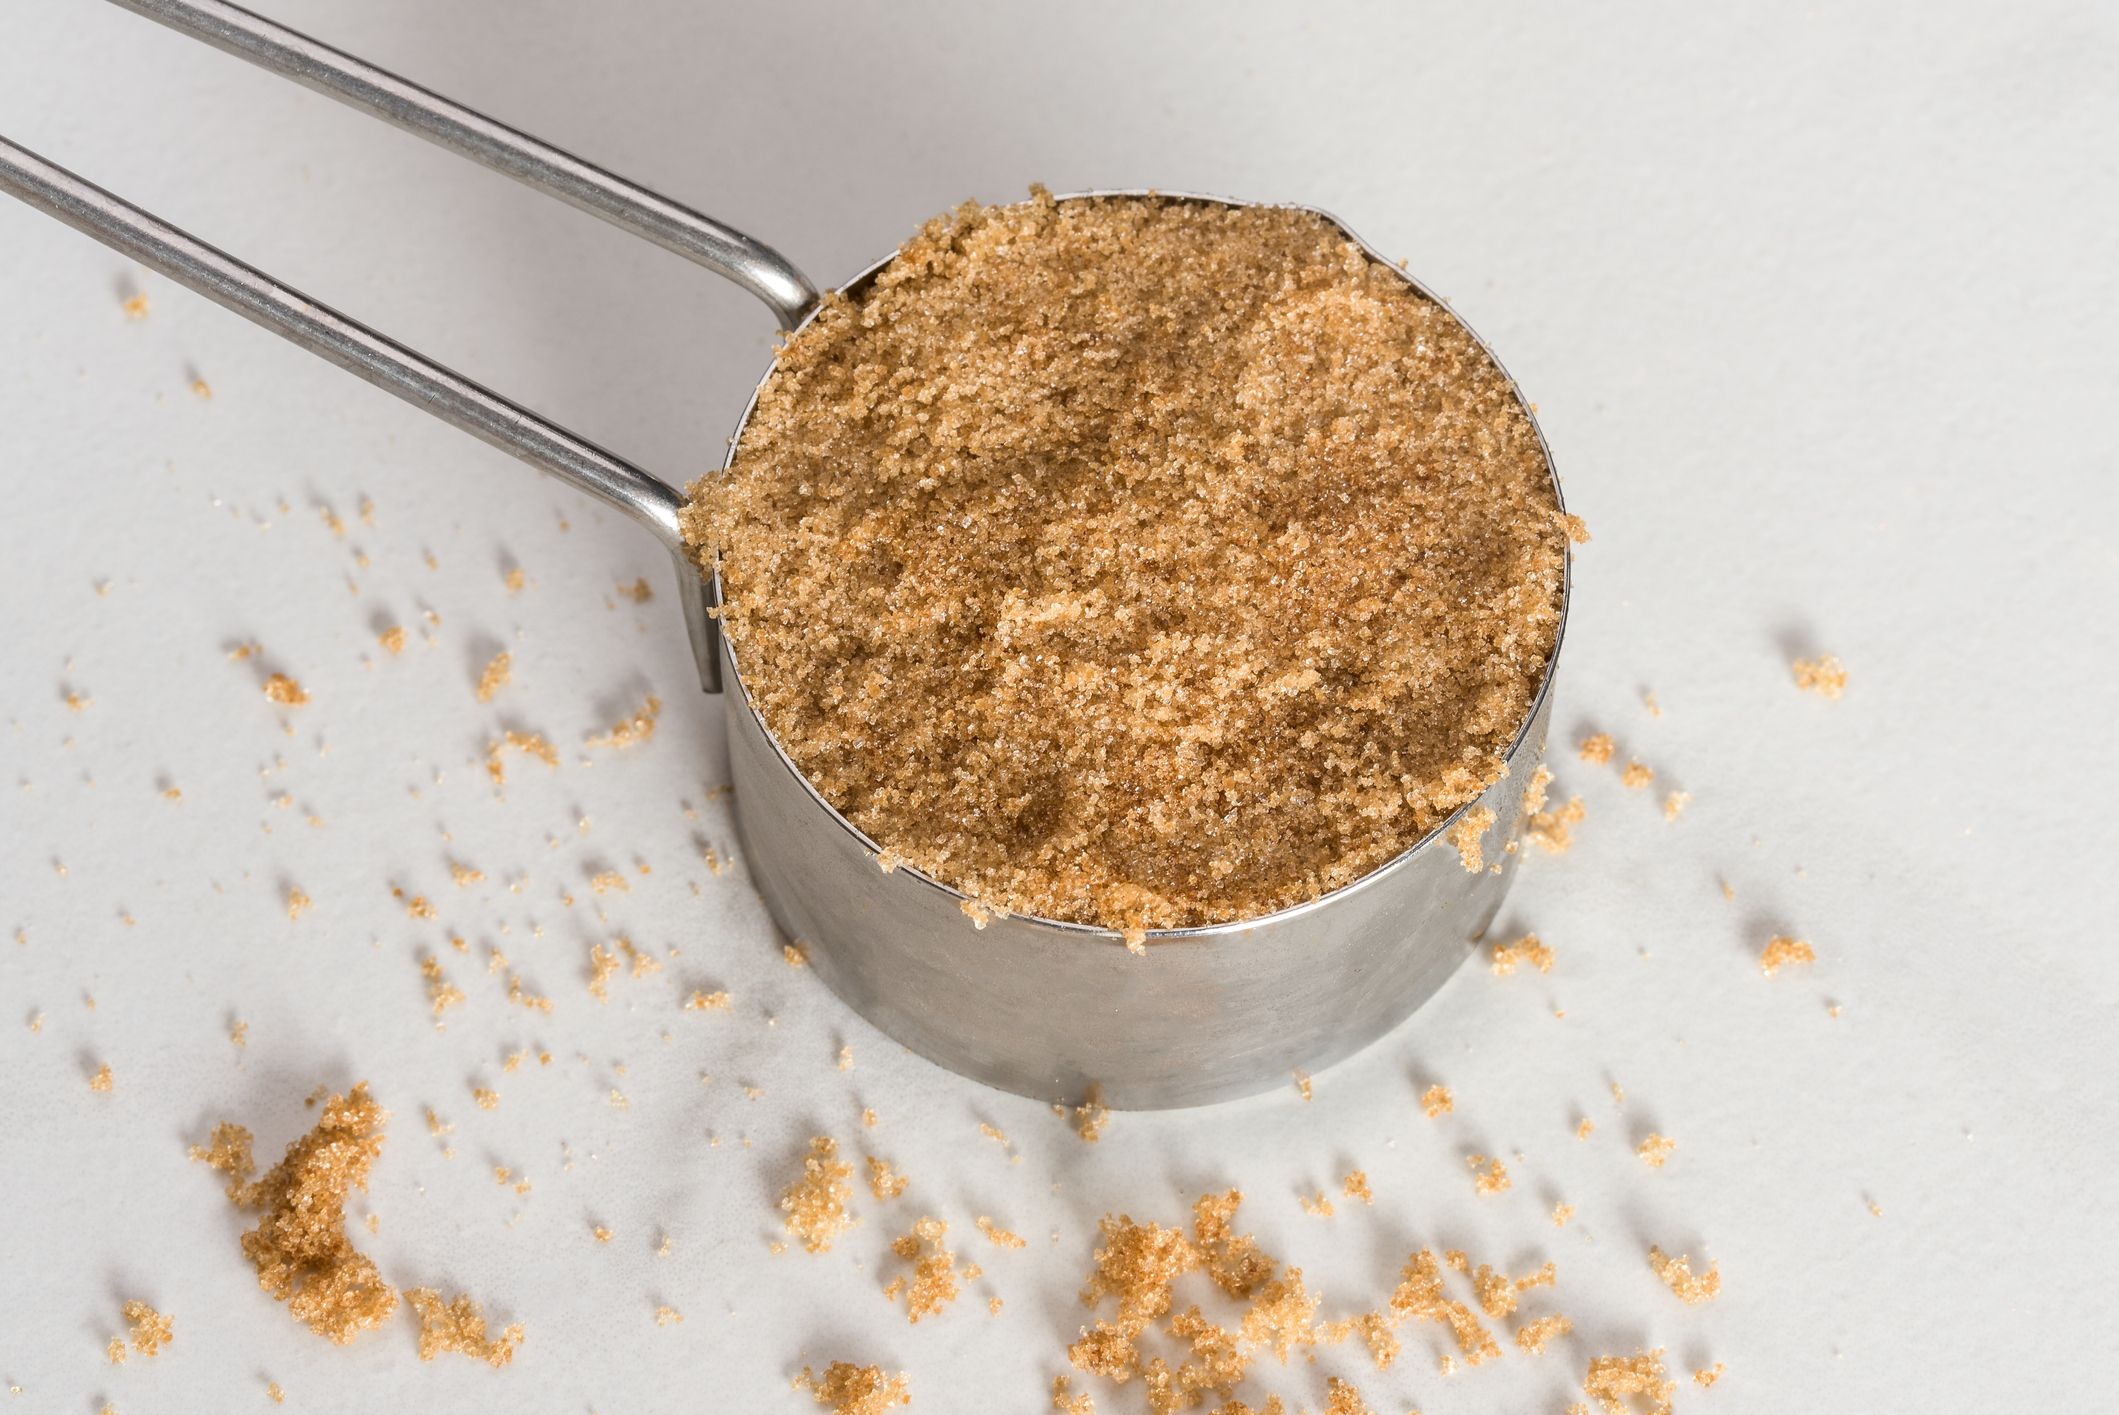 What can I substitute for brown sugar?